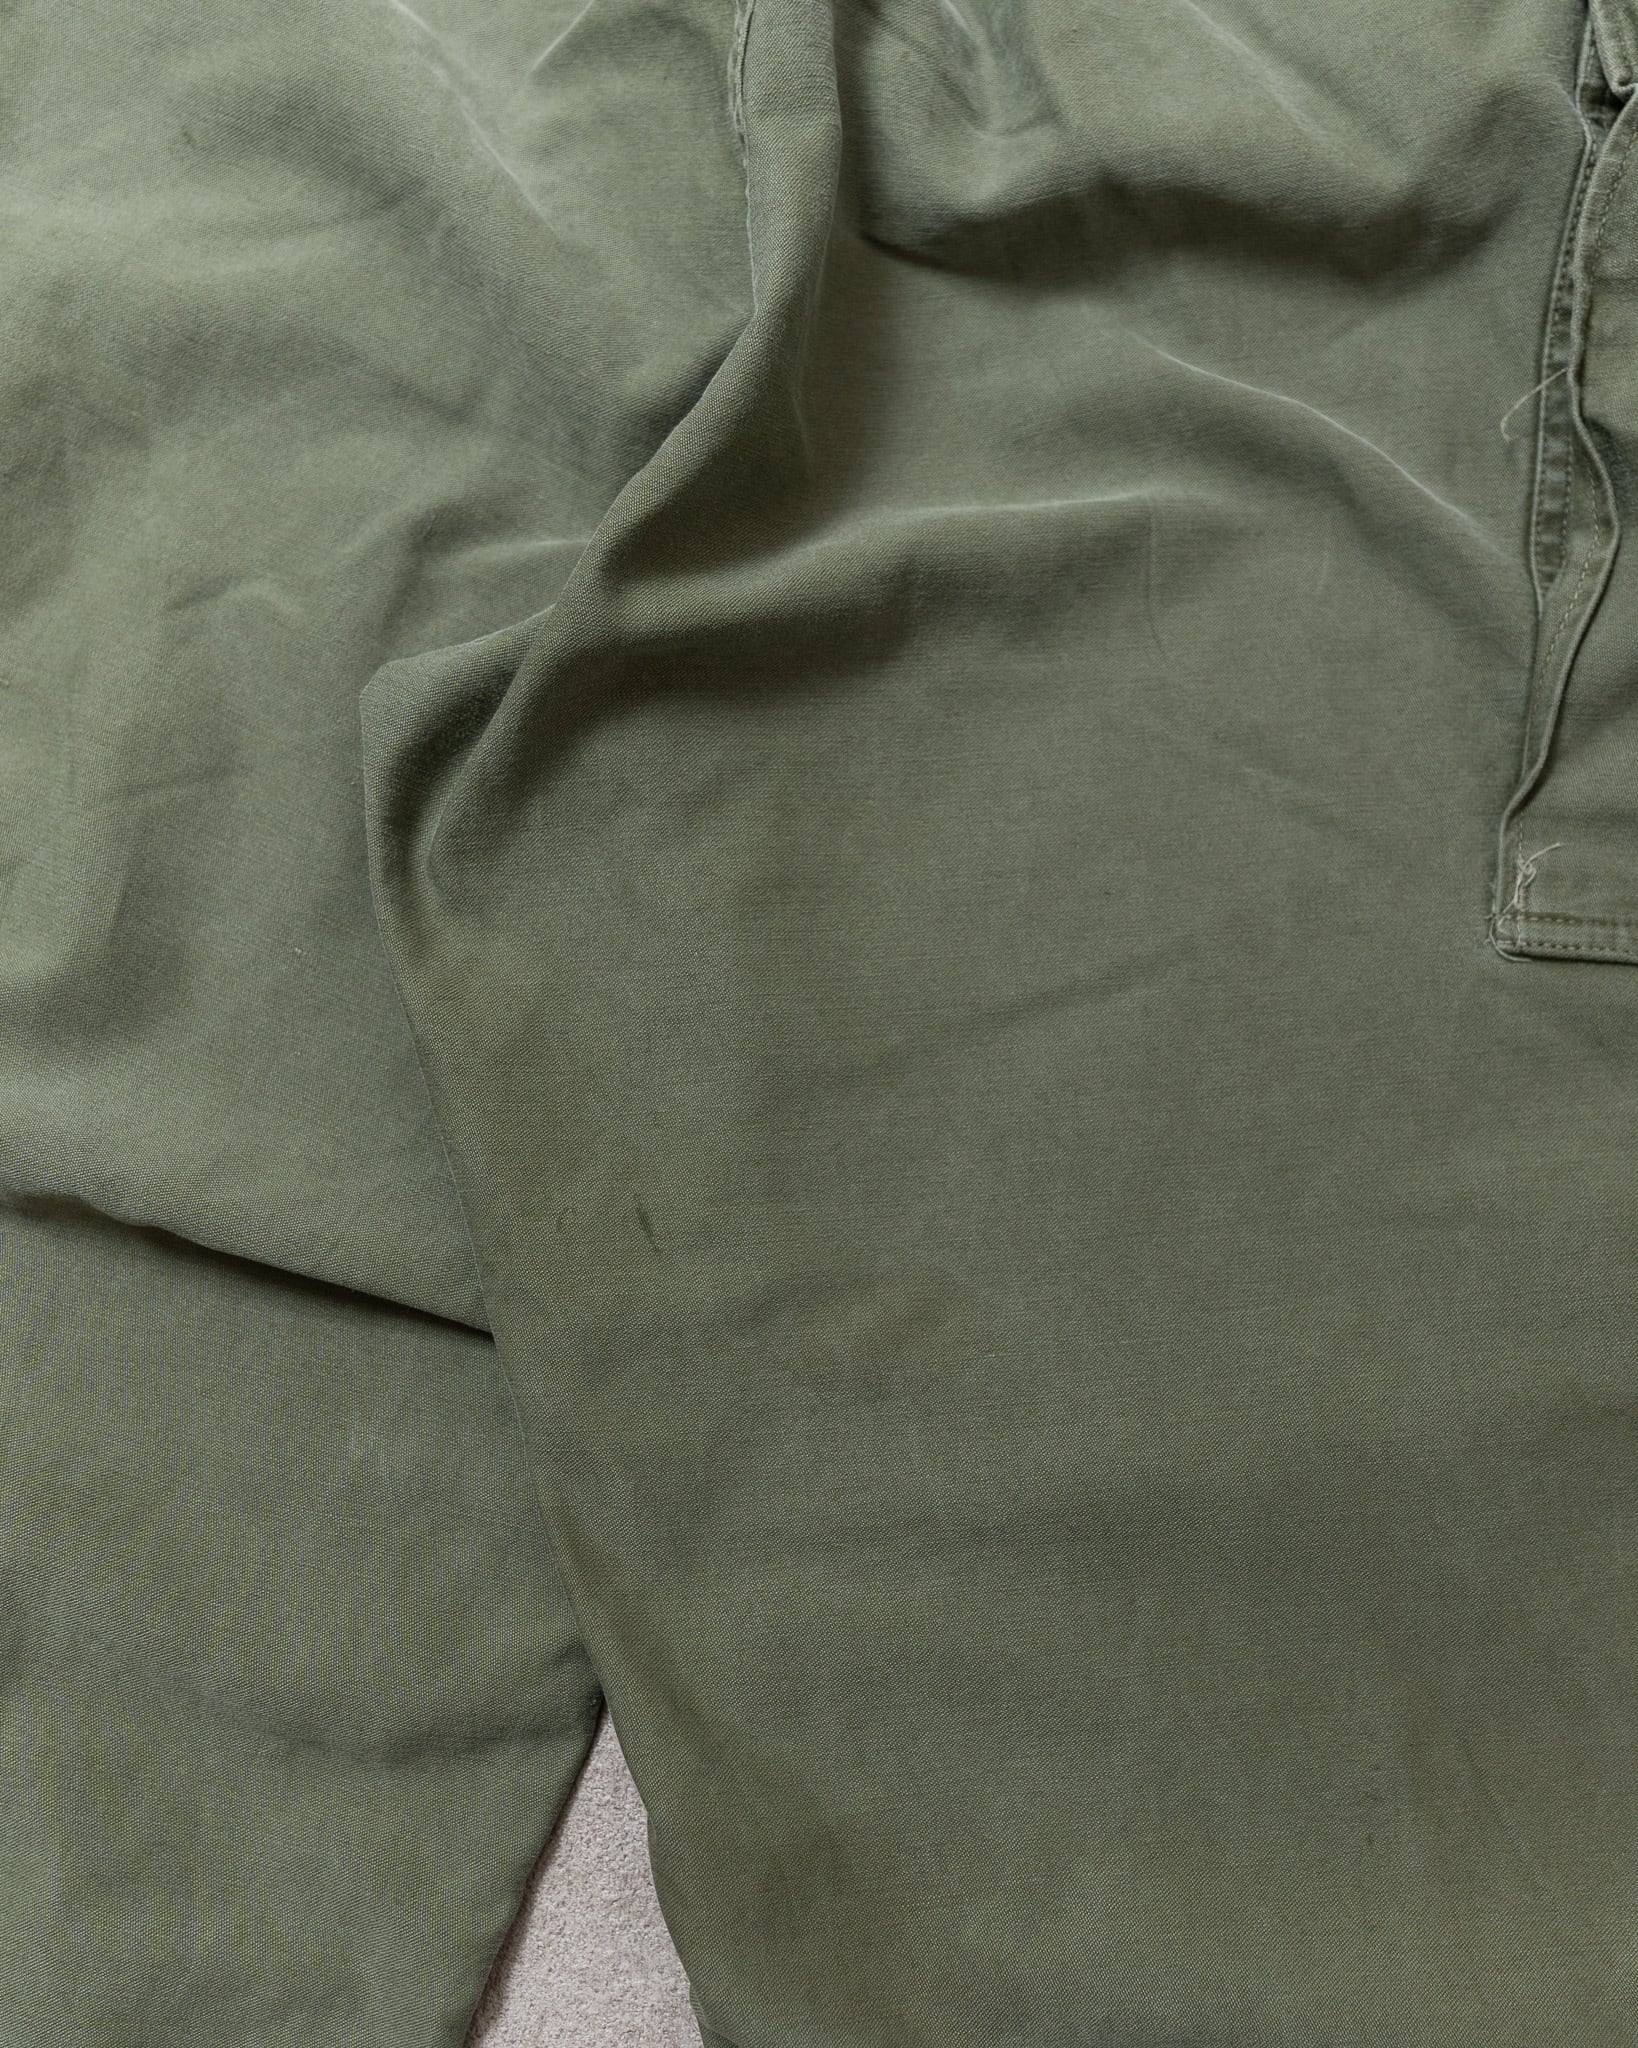 L RU.S.Army M Field Trousers "Used" アメリカ軍 M カーゴ